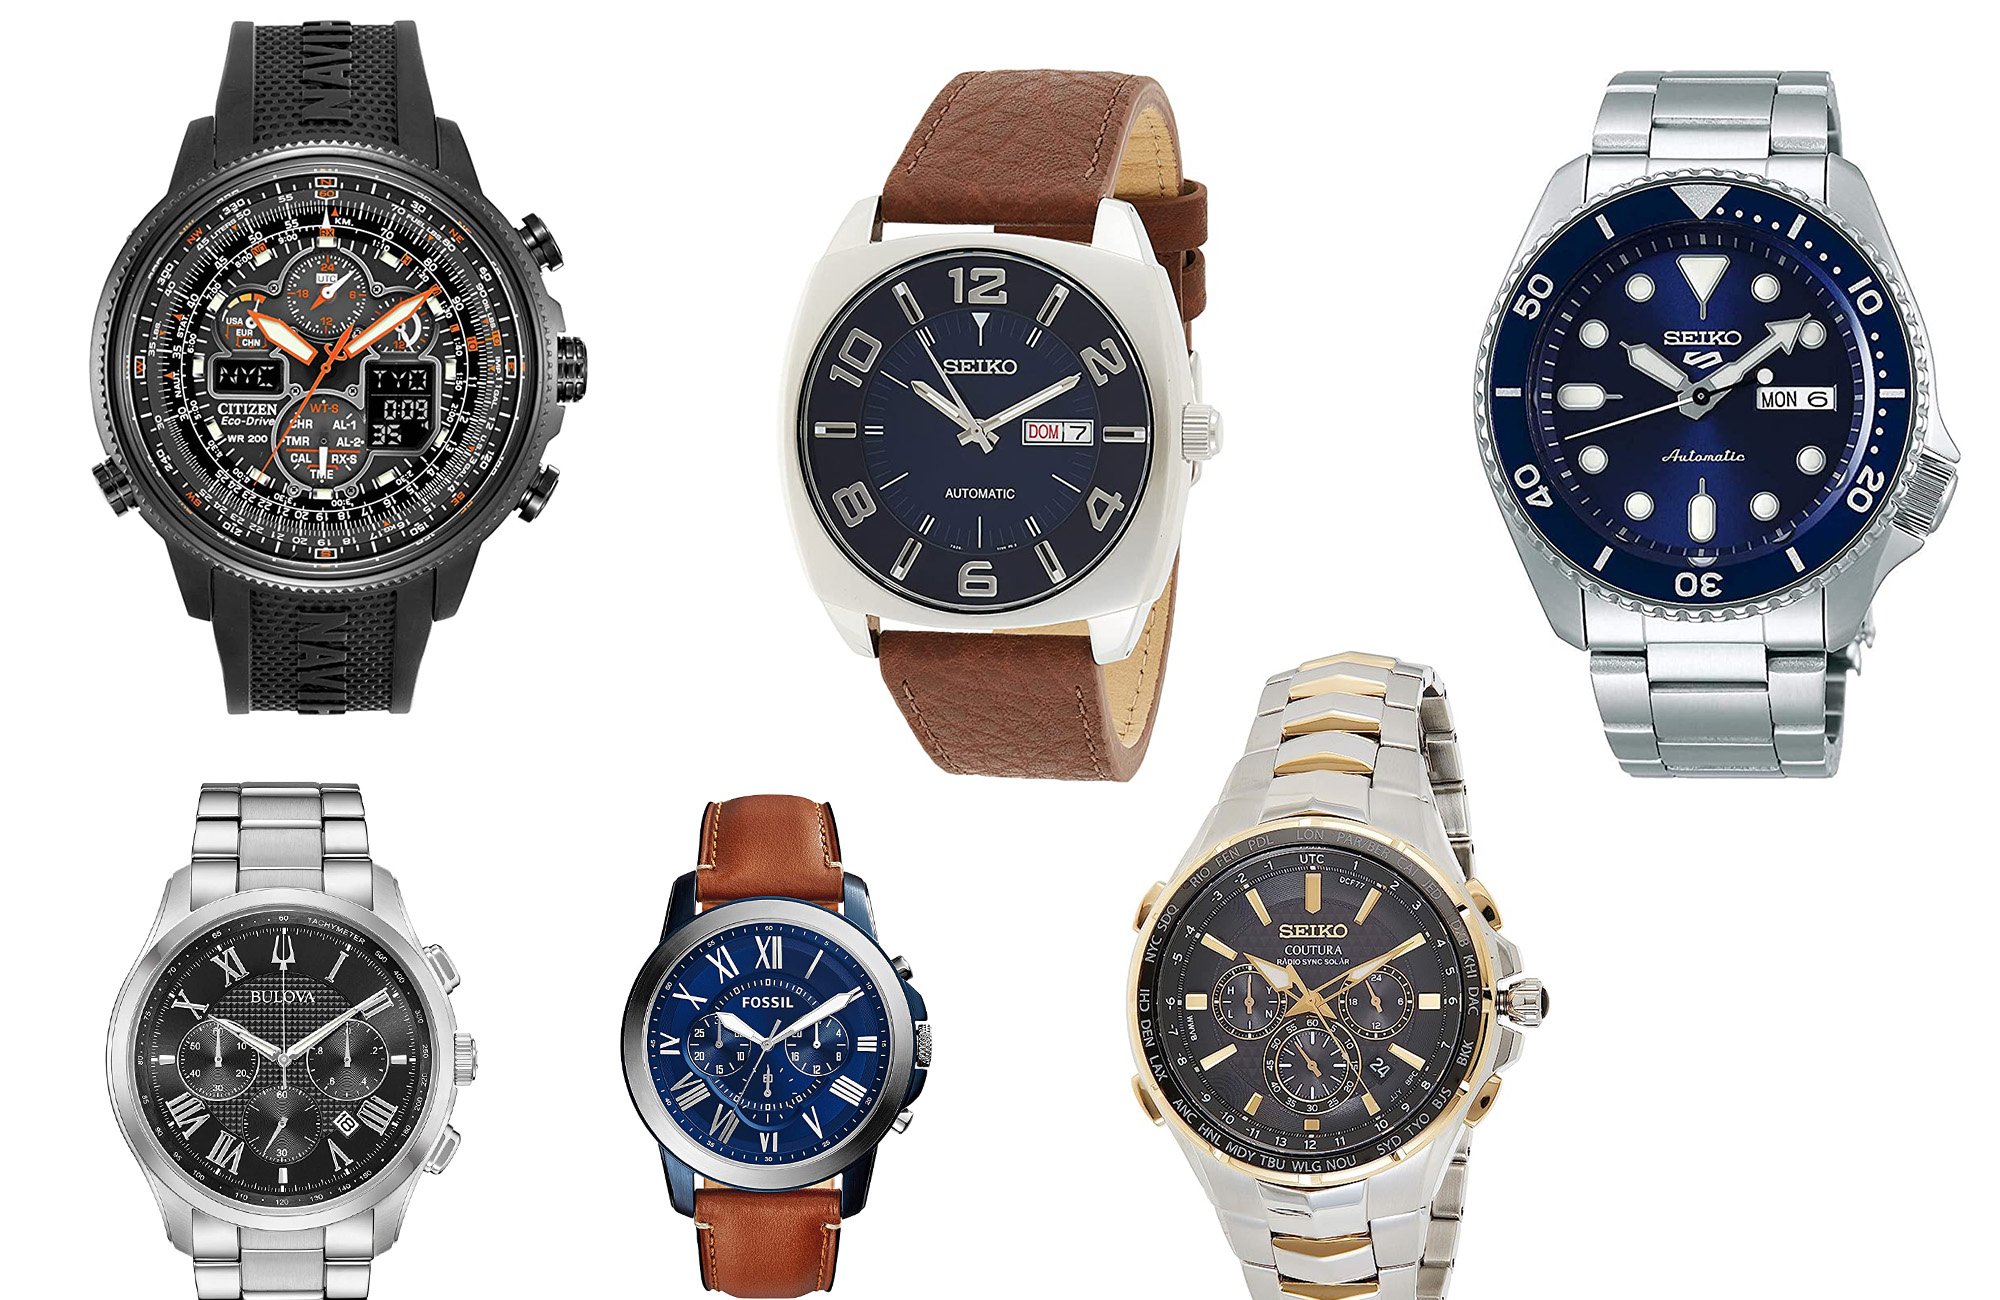 Save hundreds on watches from Seiko, Citizen, Bulova, and more during Amazon Prime Day,